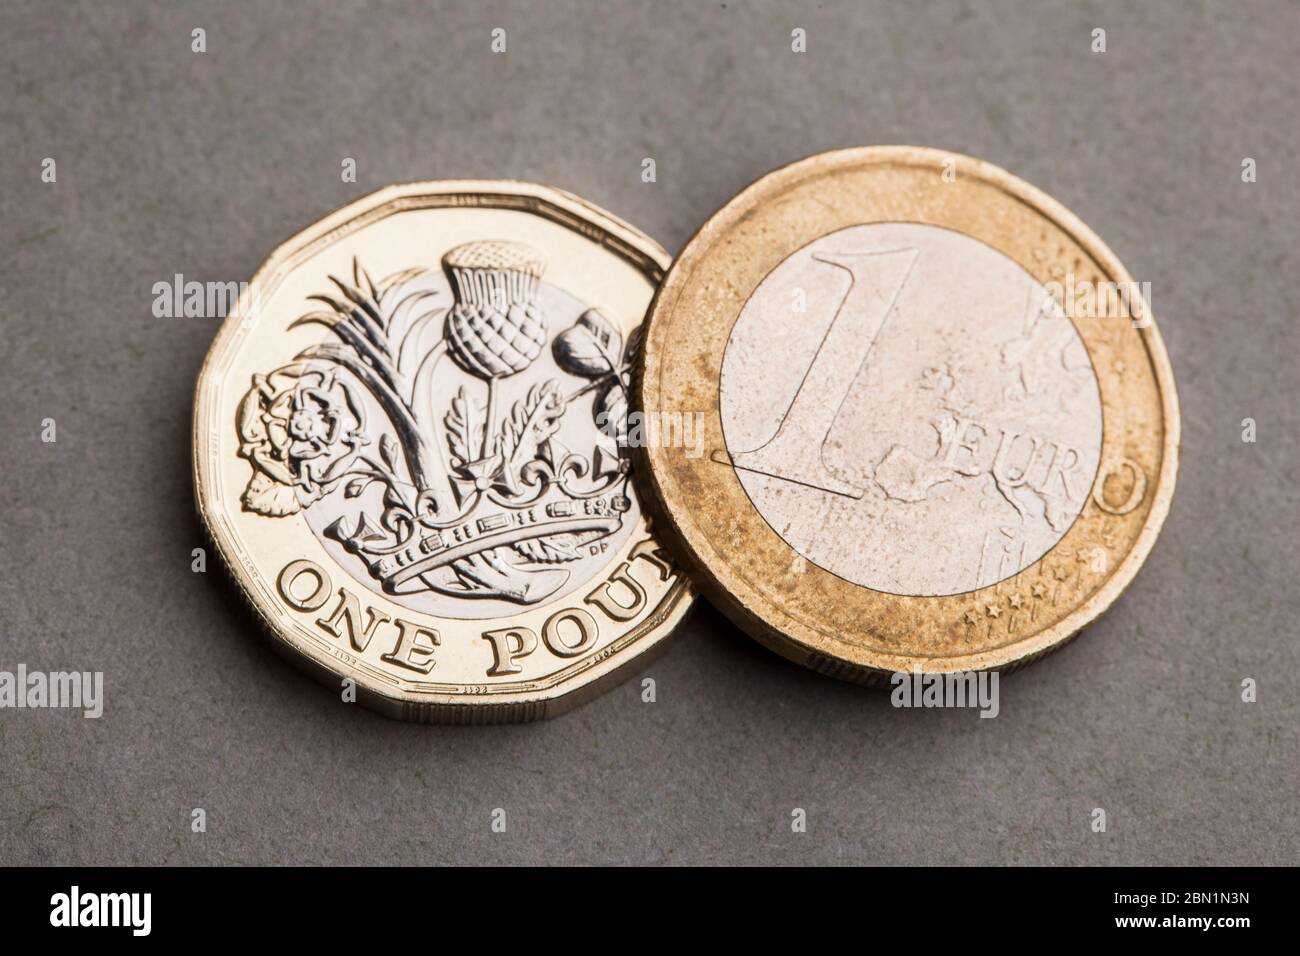 1 Euro coin - Exchange yours for cash today